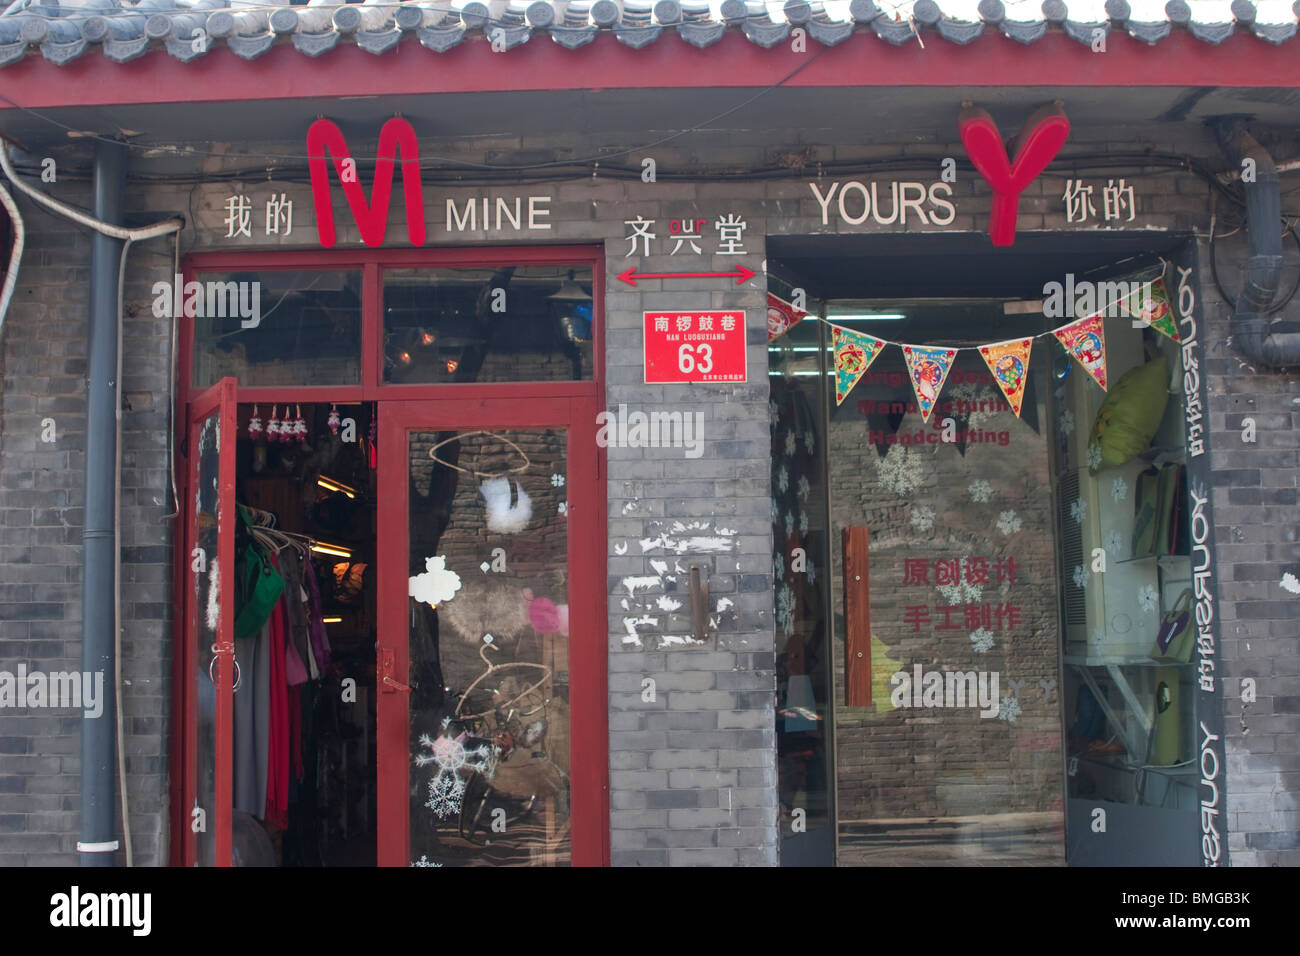 Mine Our Yours handmade craft clothing store, Nanluoguxiang Street, Beijing, China Stock Photo